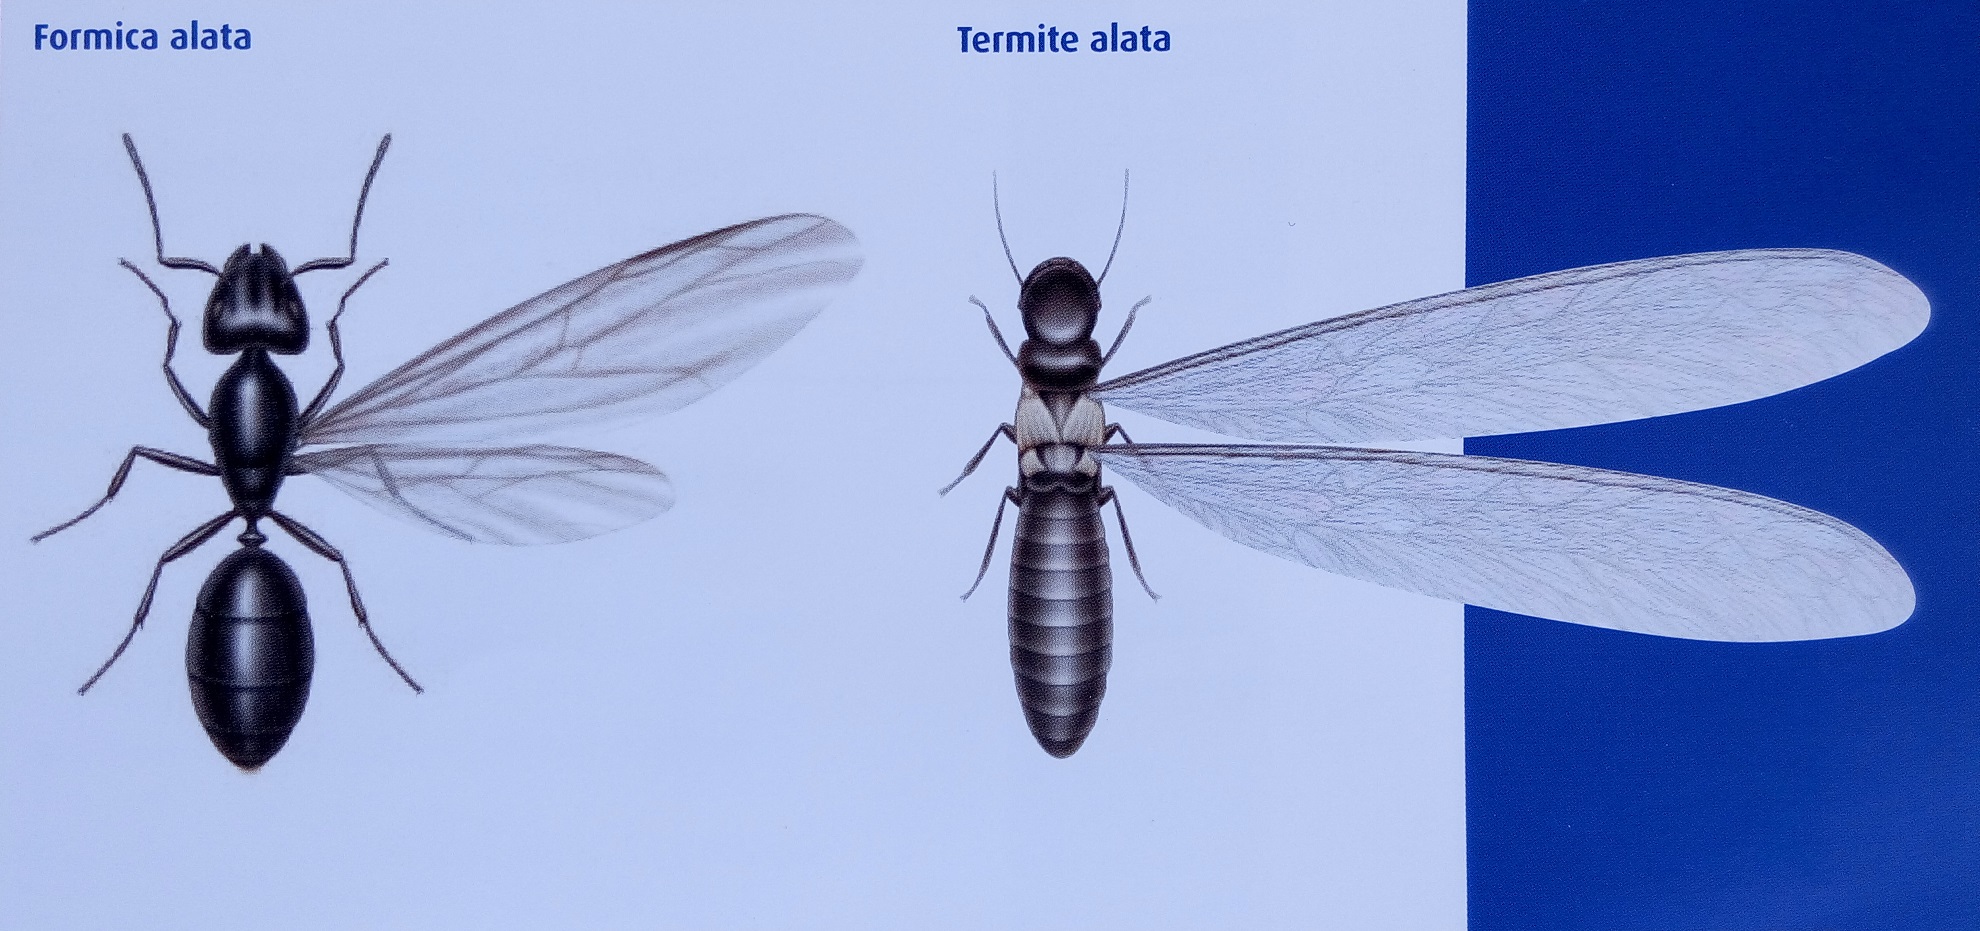 The difference between termites and flying ants